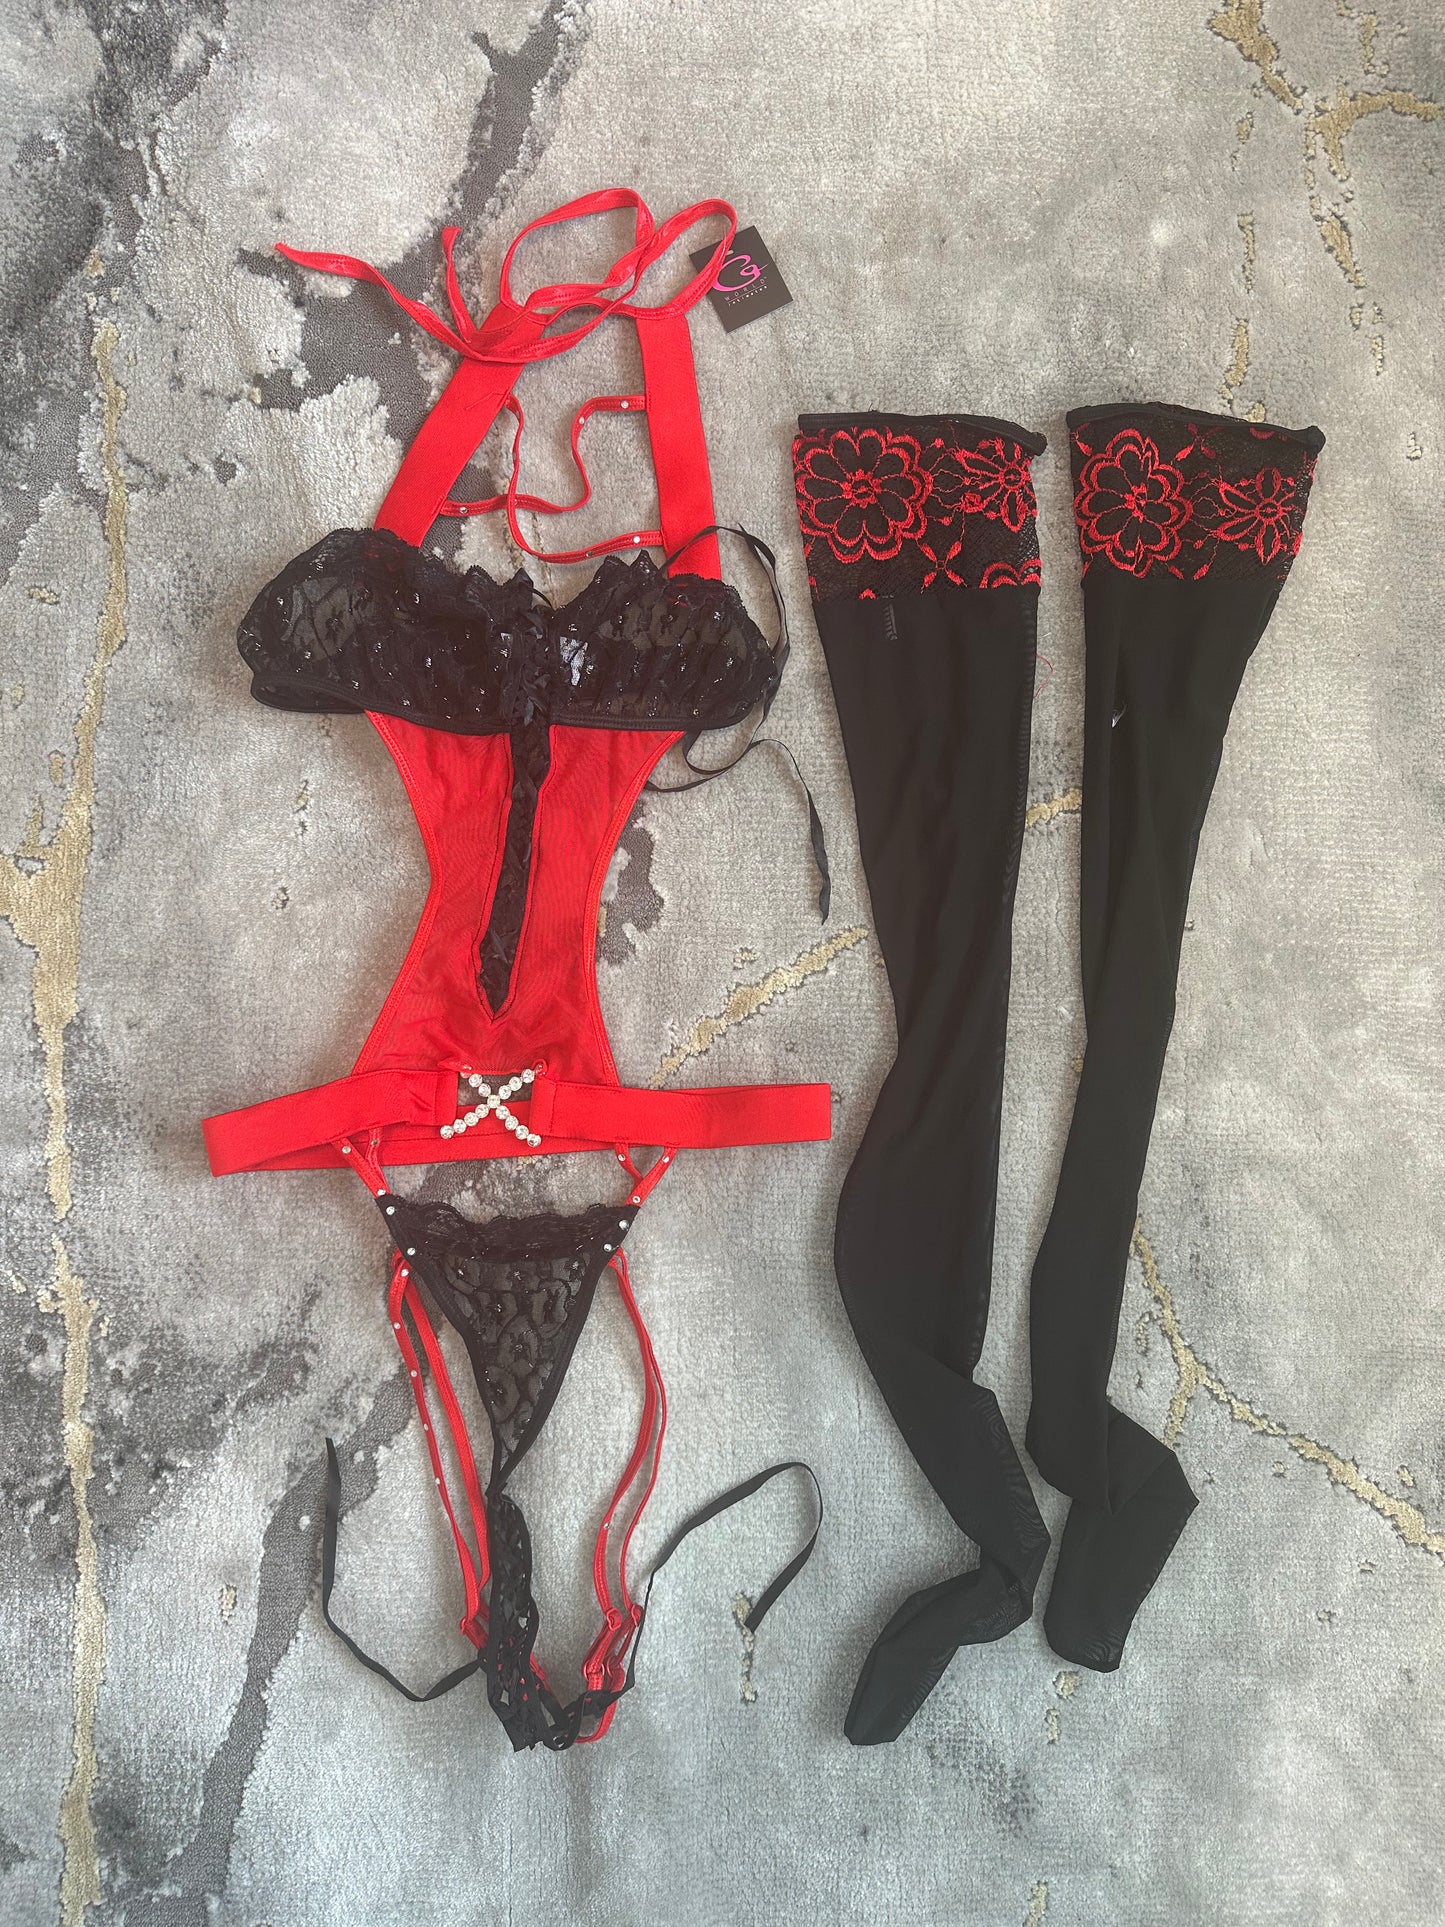 Harley's Personal Lingerie Collectioin